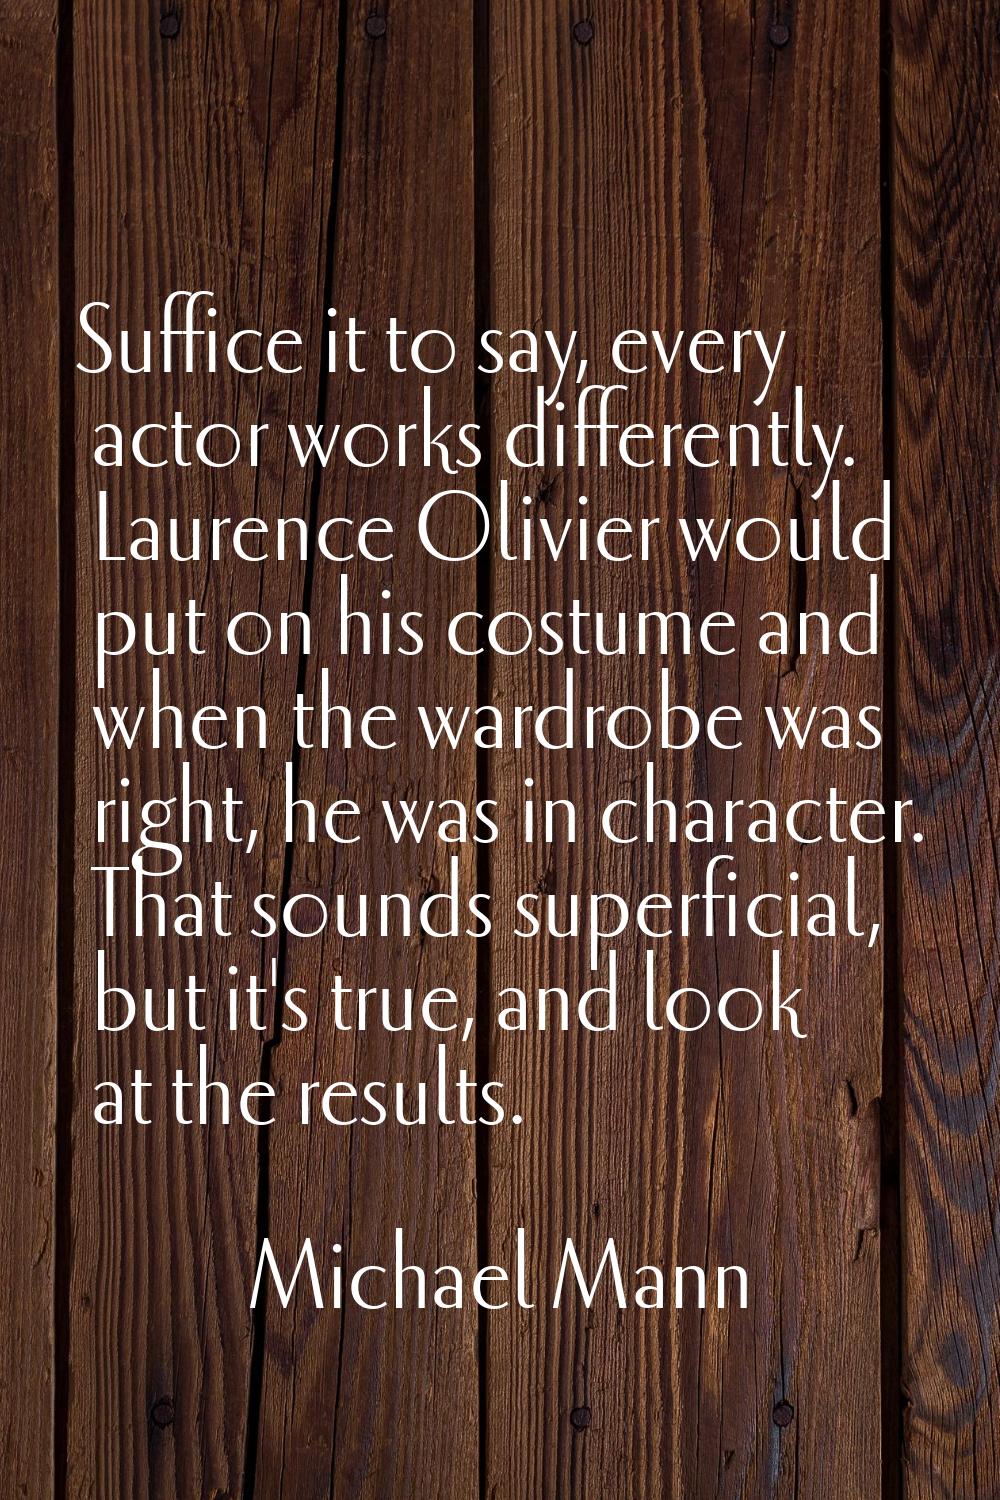 Suffice it to say, every actor works differently. Laurence Olivier would put on his costume and whe